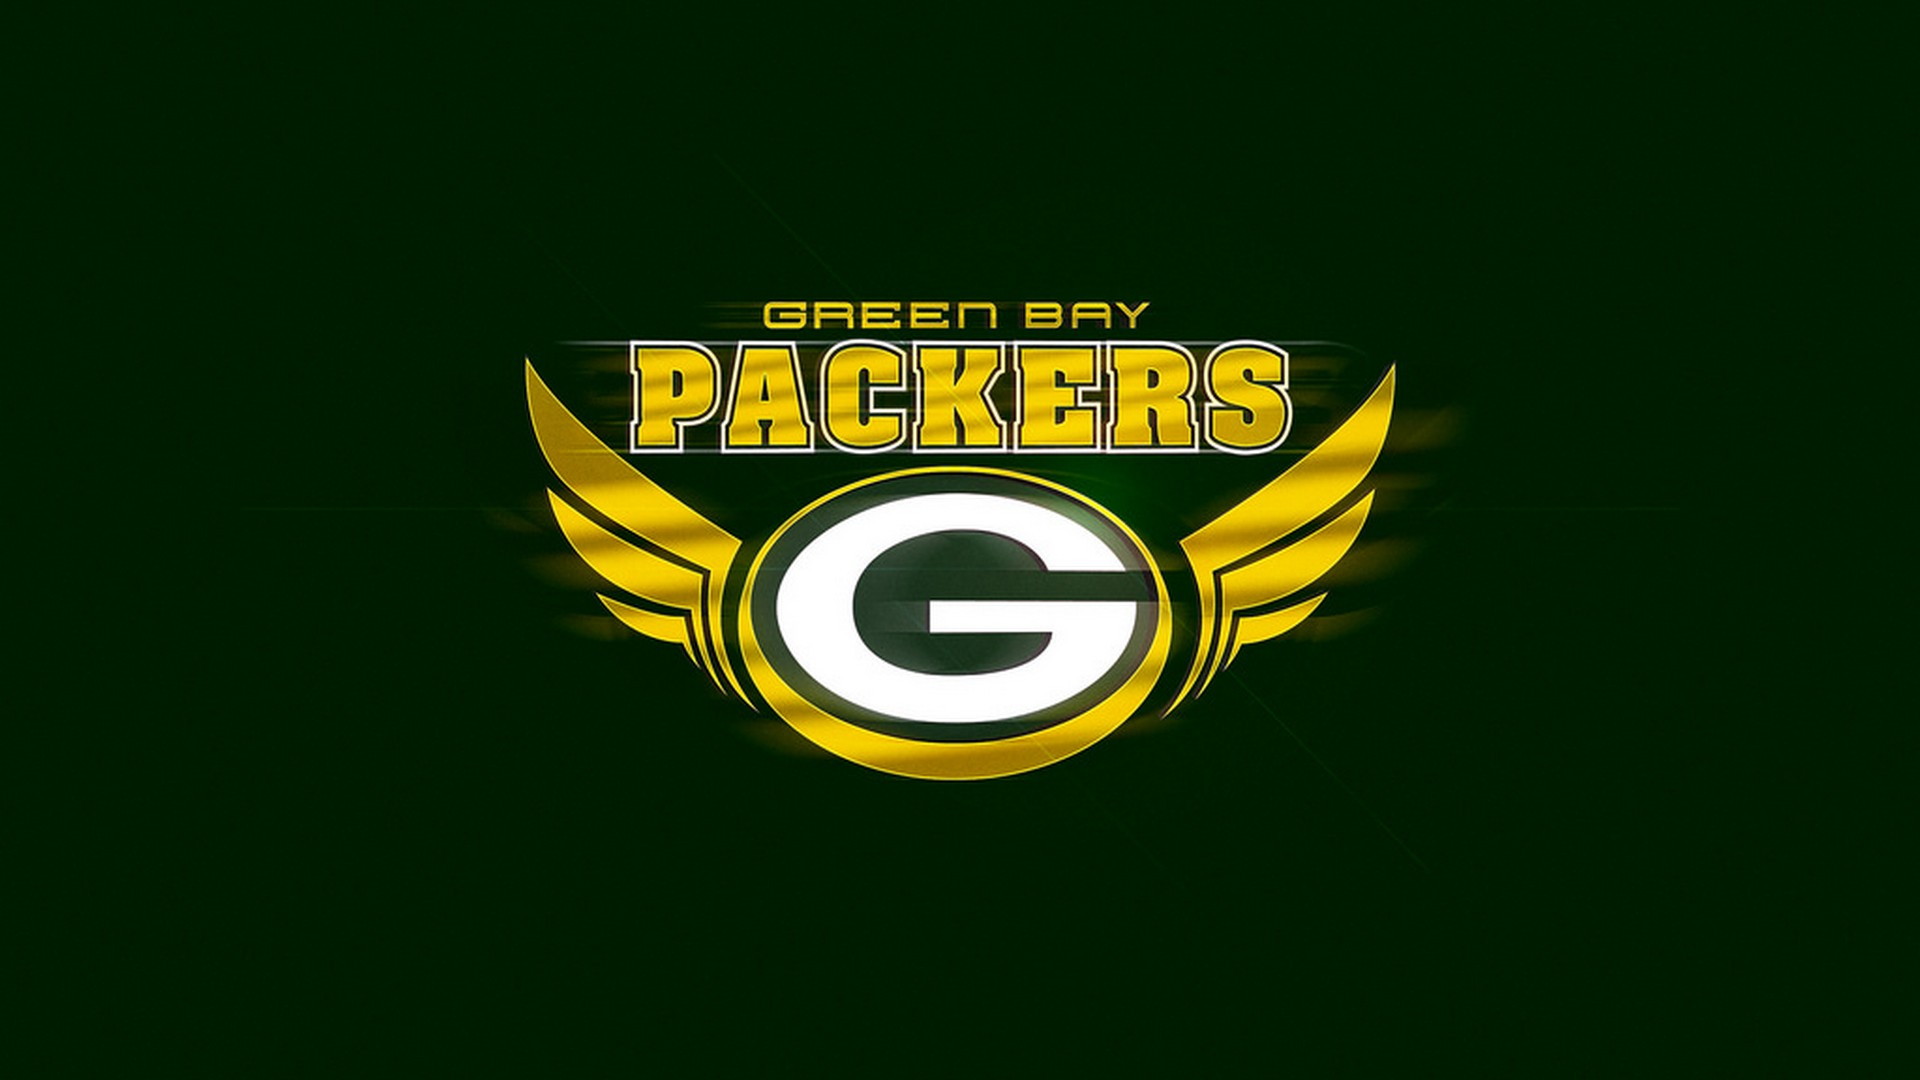 Green Bay Packers Wallpaper HD Laptop with high-resolution 1920x1080 pixel. You can use and set as wallpaper for Notebook Screensavers, Mac Wallpapers, Mobile Home Screen, iPhone or Android Phones Lock Screen